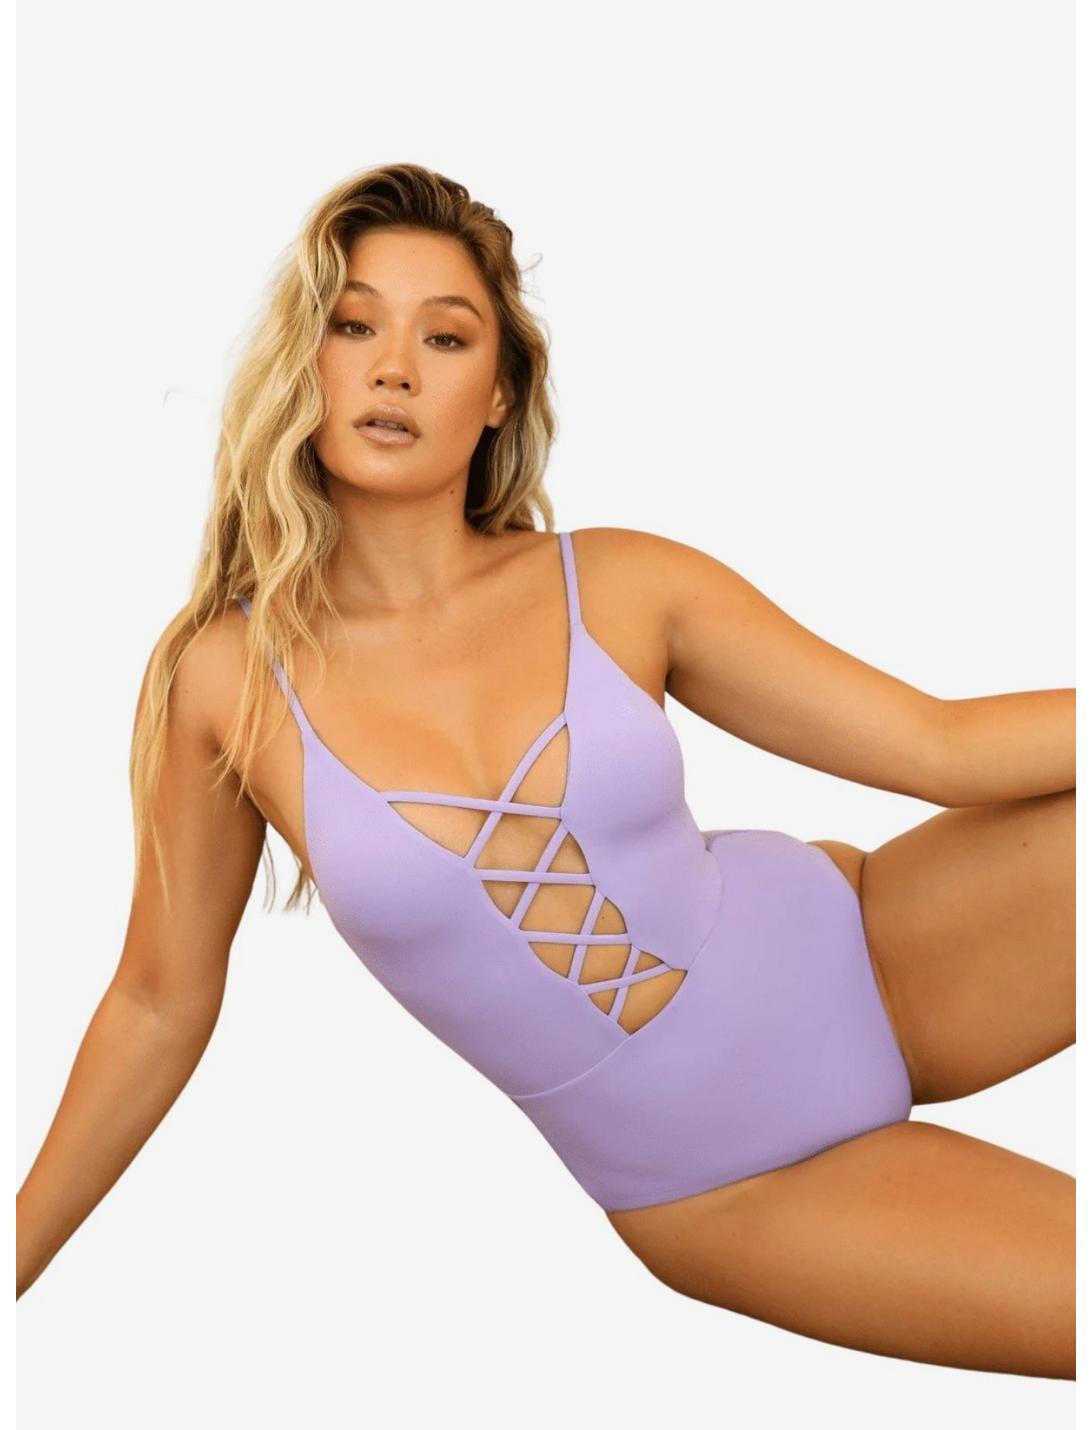 Dippin' Daisy's Bliss One Piece Amethyst, PURPLE, hi-res